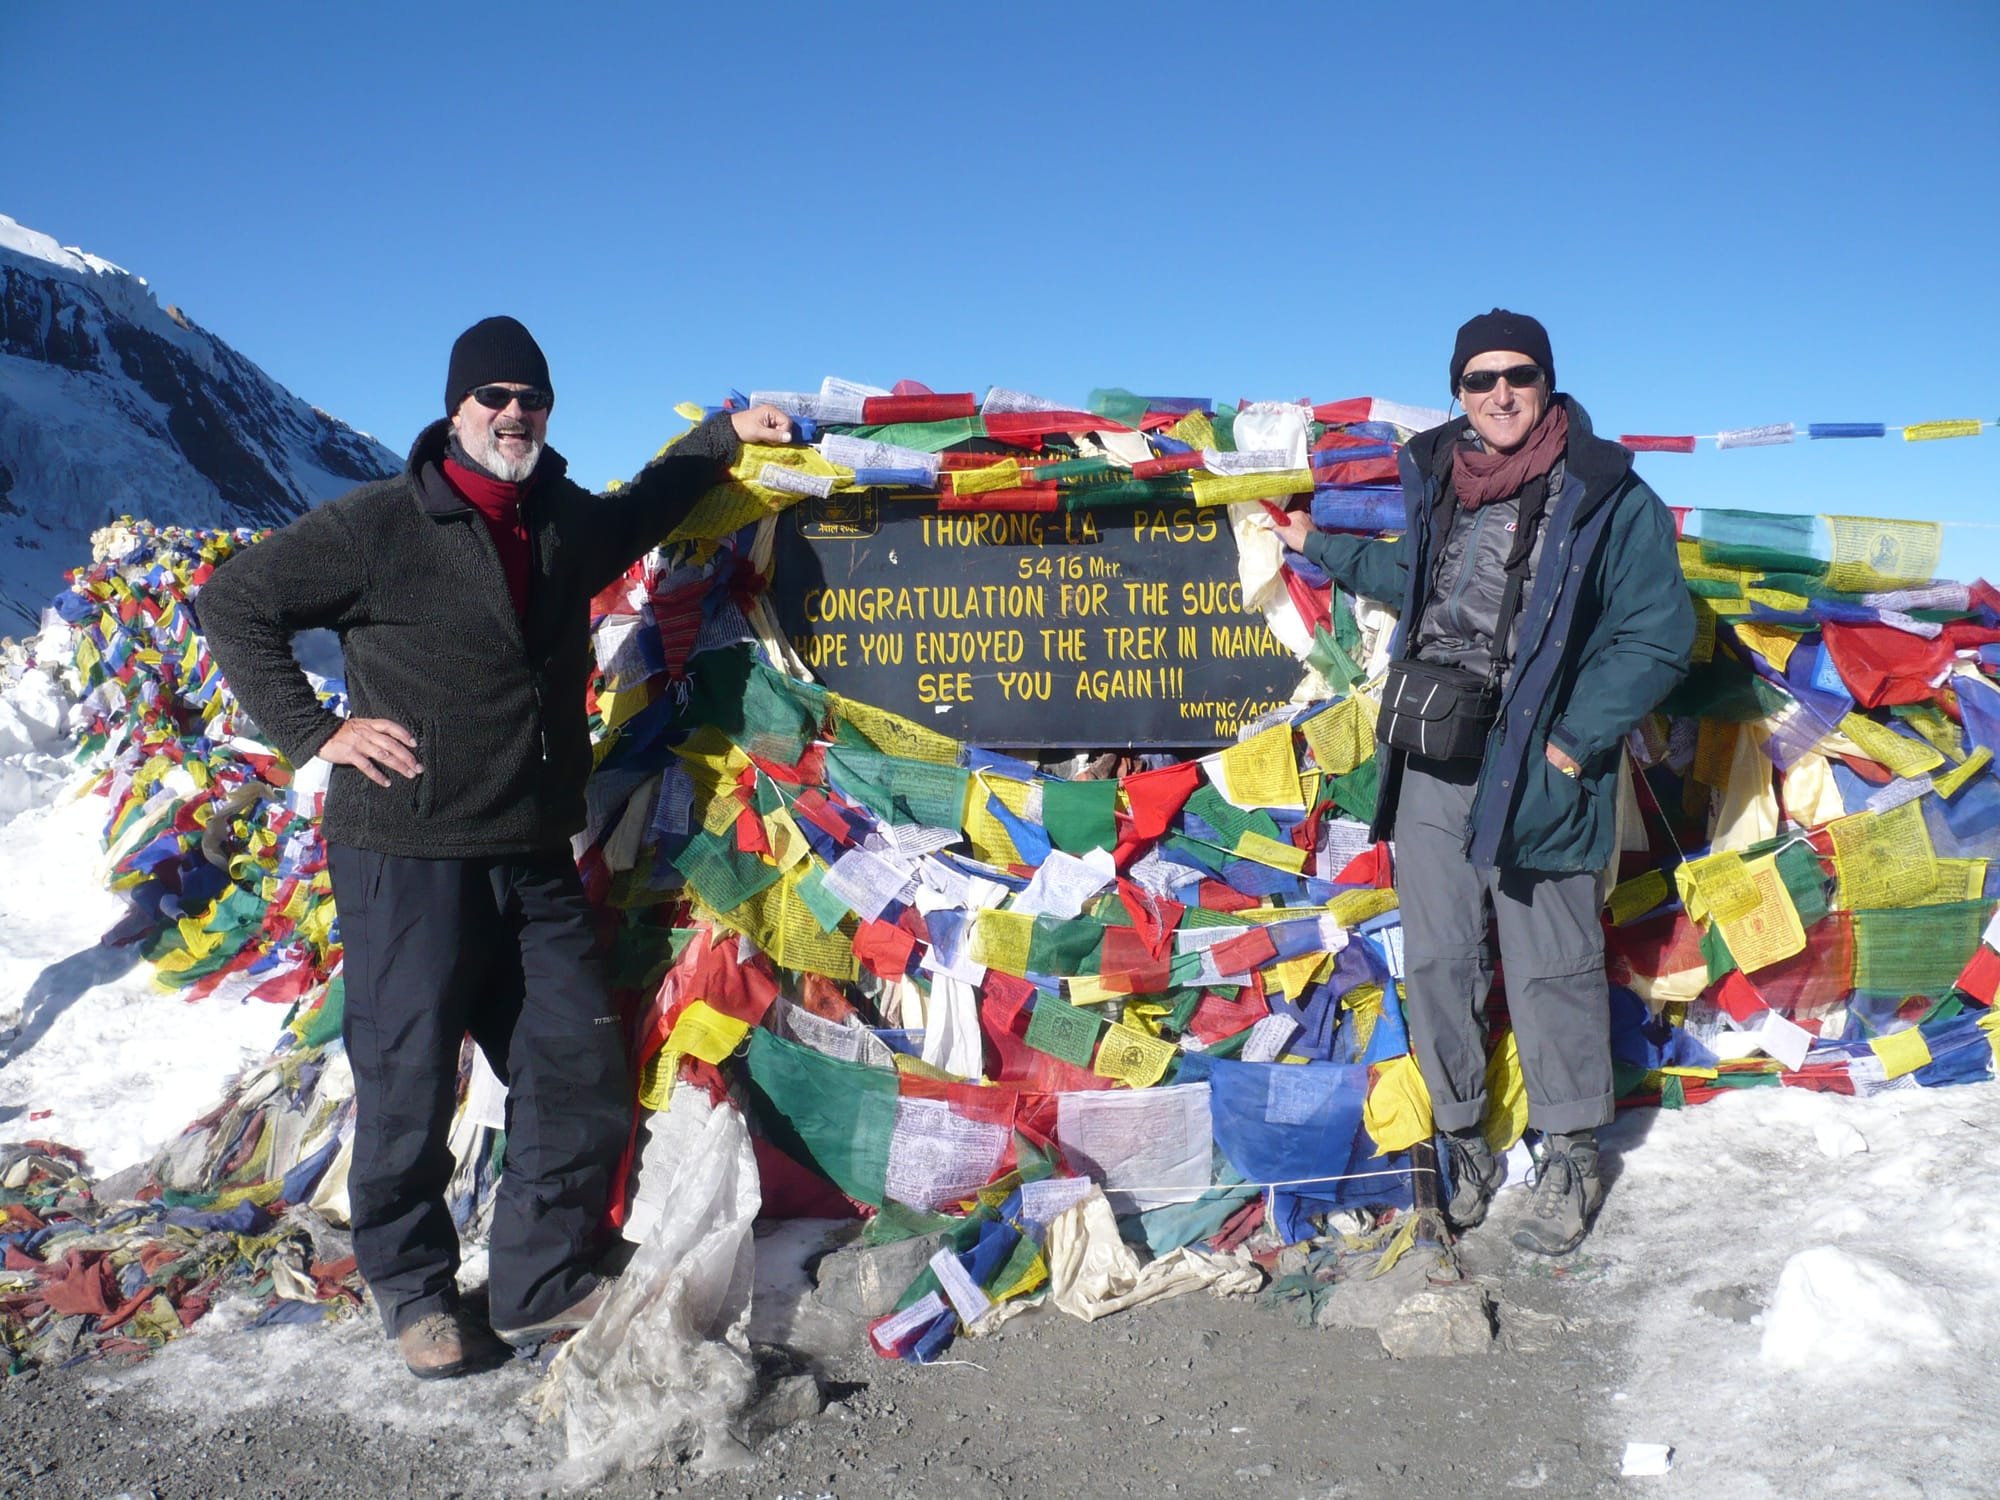 MYSELF AND JONATHAN TROSS AT THE TOP OF THE THORONG LA PASS.